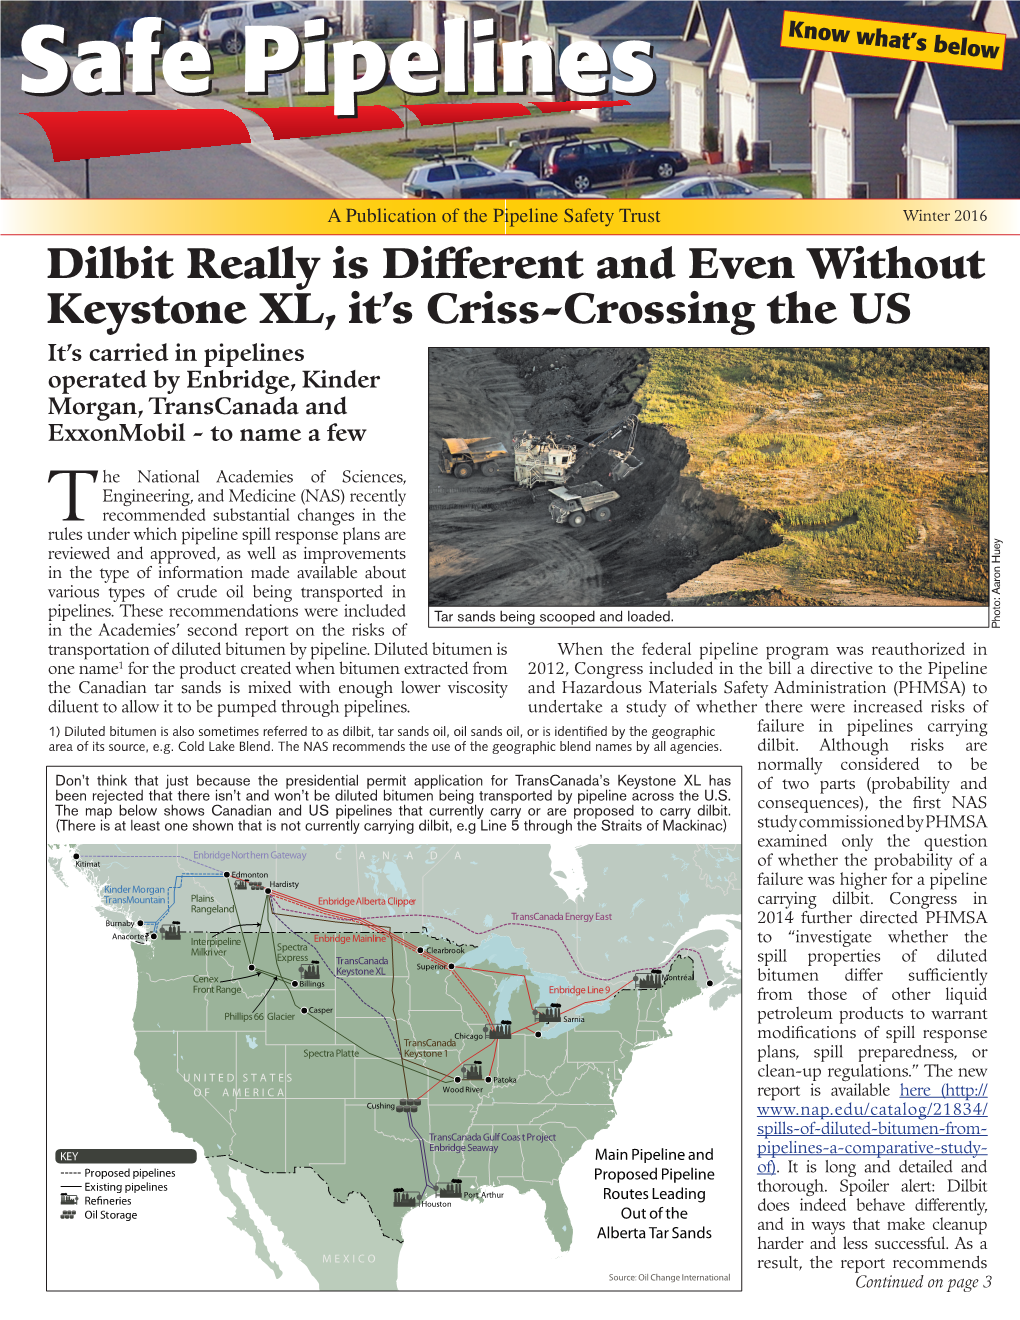 Dilbit Really Is Different and Even Without Keystone XL, It's Criss